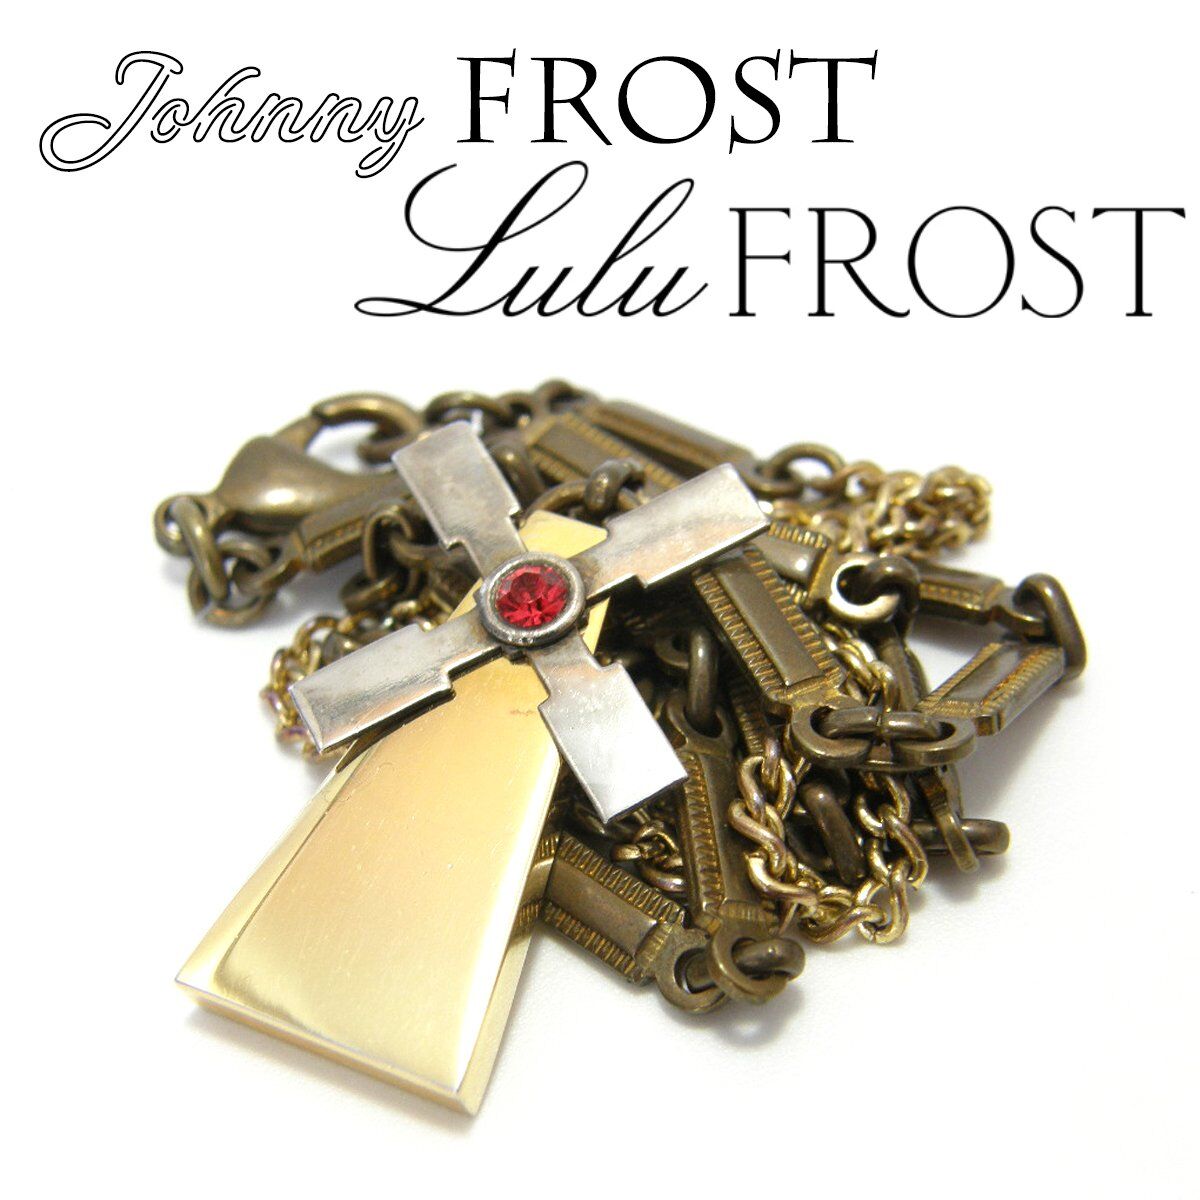 Johnny FROST / ジョニー フロスト　ペンダント アンティーク ヴィンテージ ネックレス LULU FROST ルルフロスト 入手困難  ジョニーフロスト